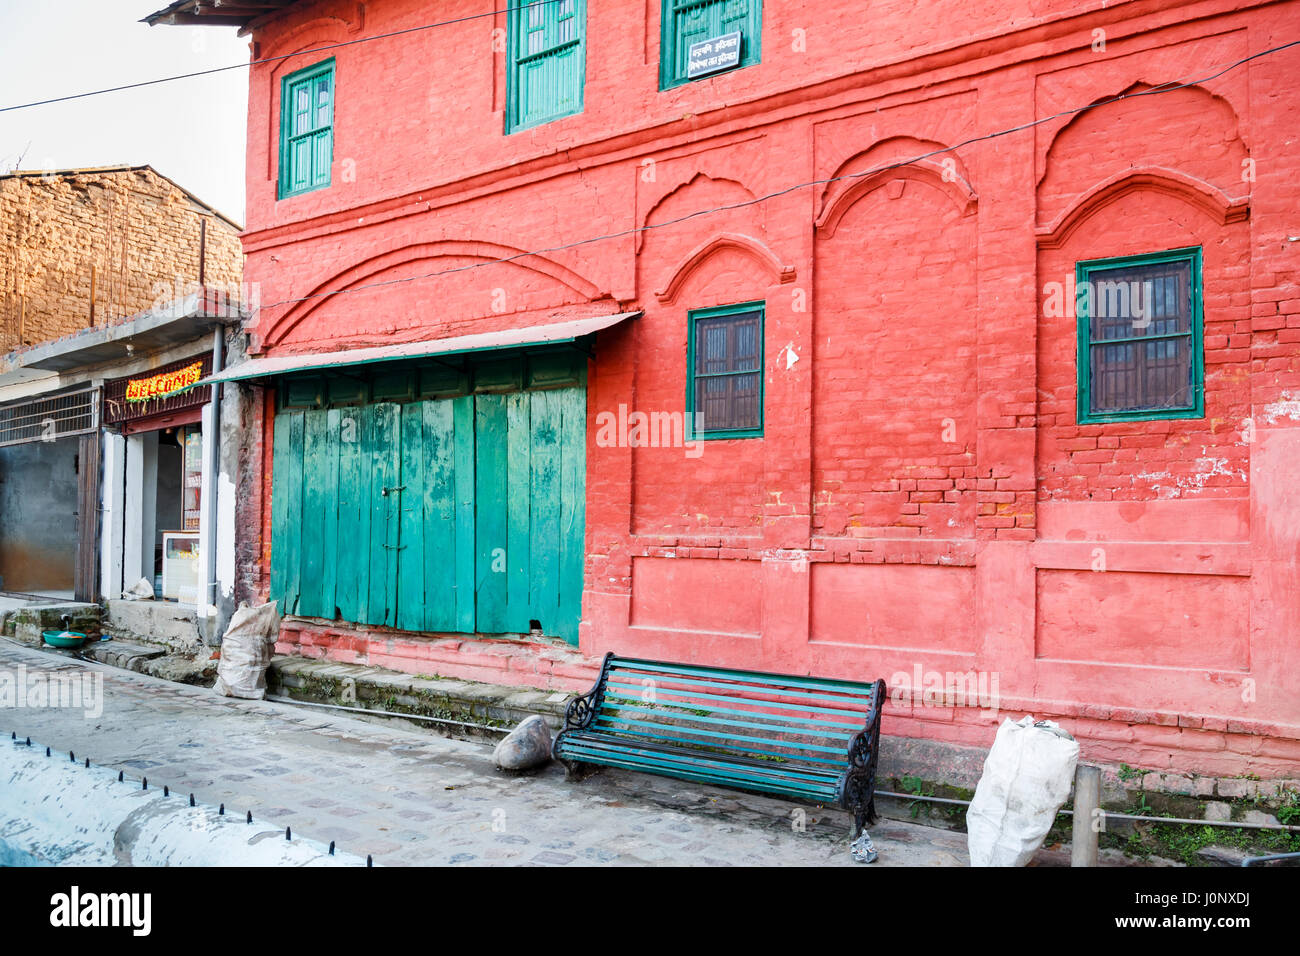 Painted red brick warehouse building with green dilapidated wooden doors, Pragpur, a heritage village in Kagra district, Himachal Pradesh, India Stock Photo